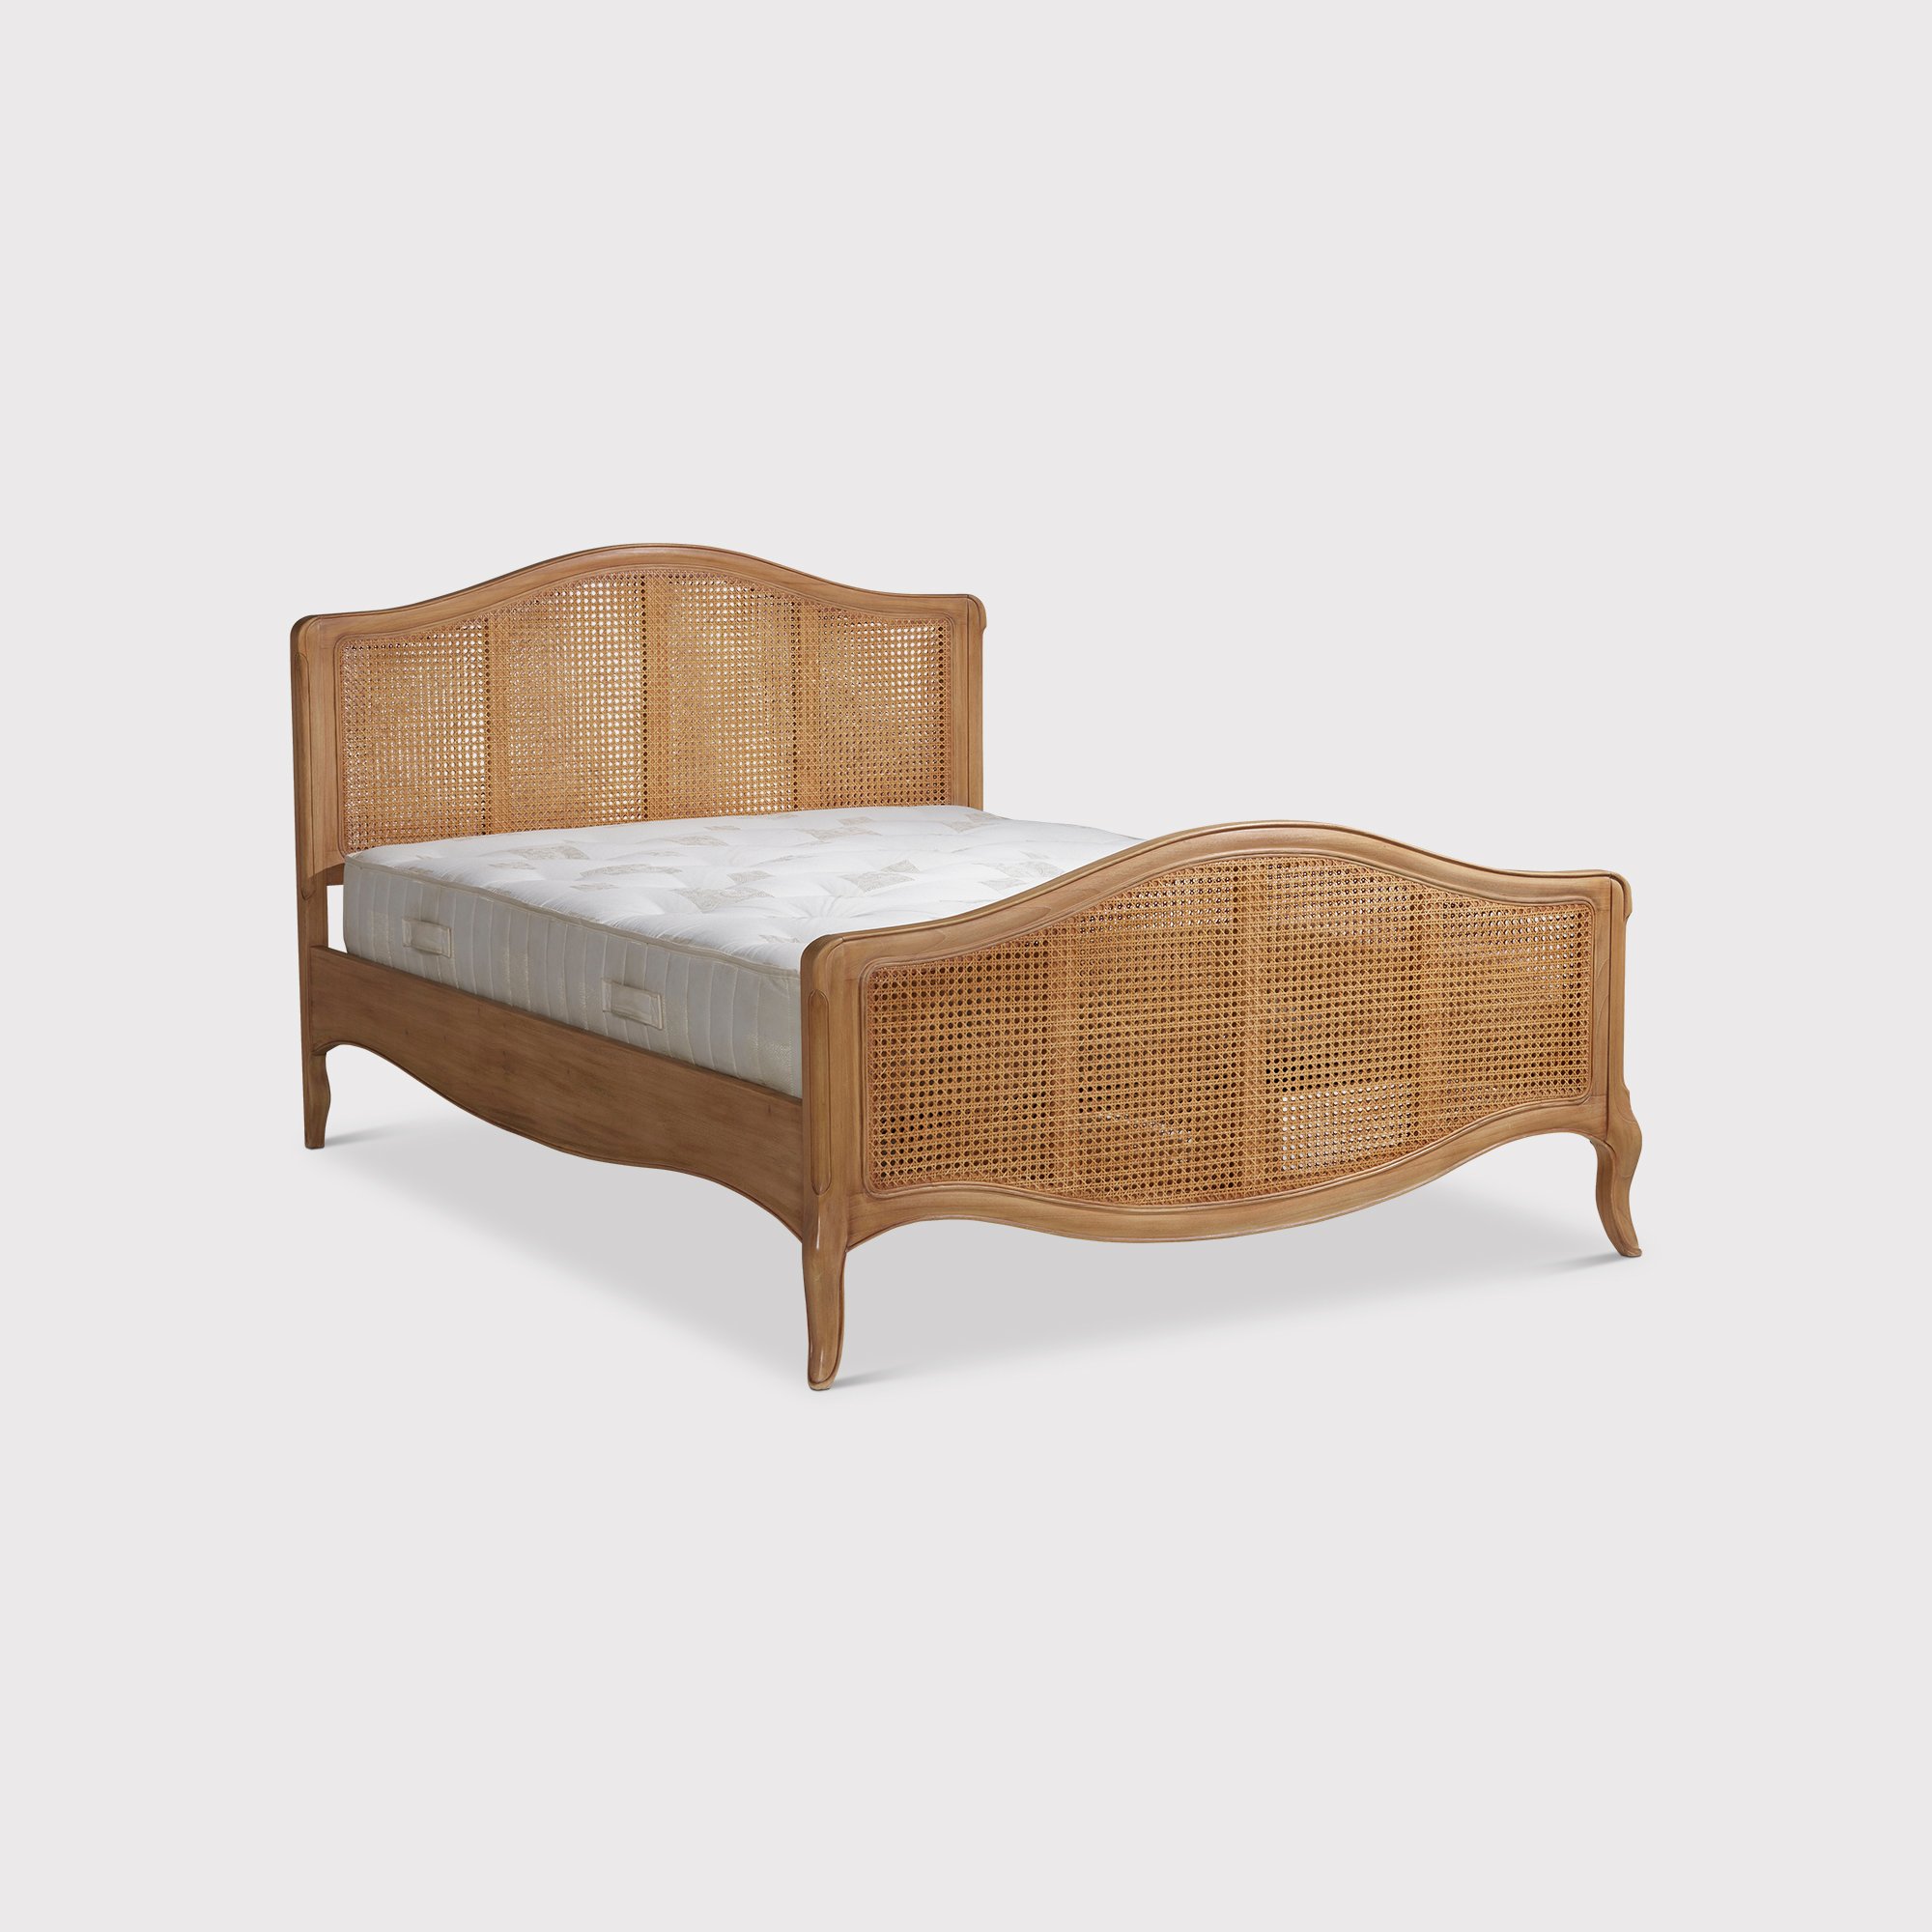 Cecile 180cm High Footend Bed, Neutral | Super King | Barker & Stonehouse